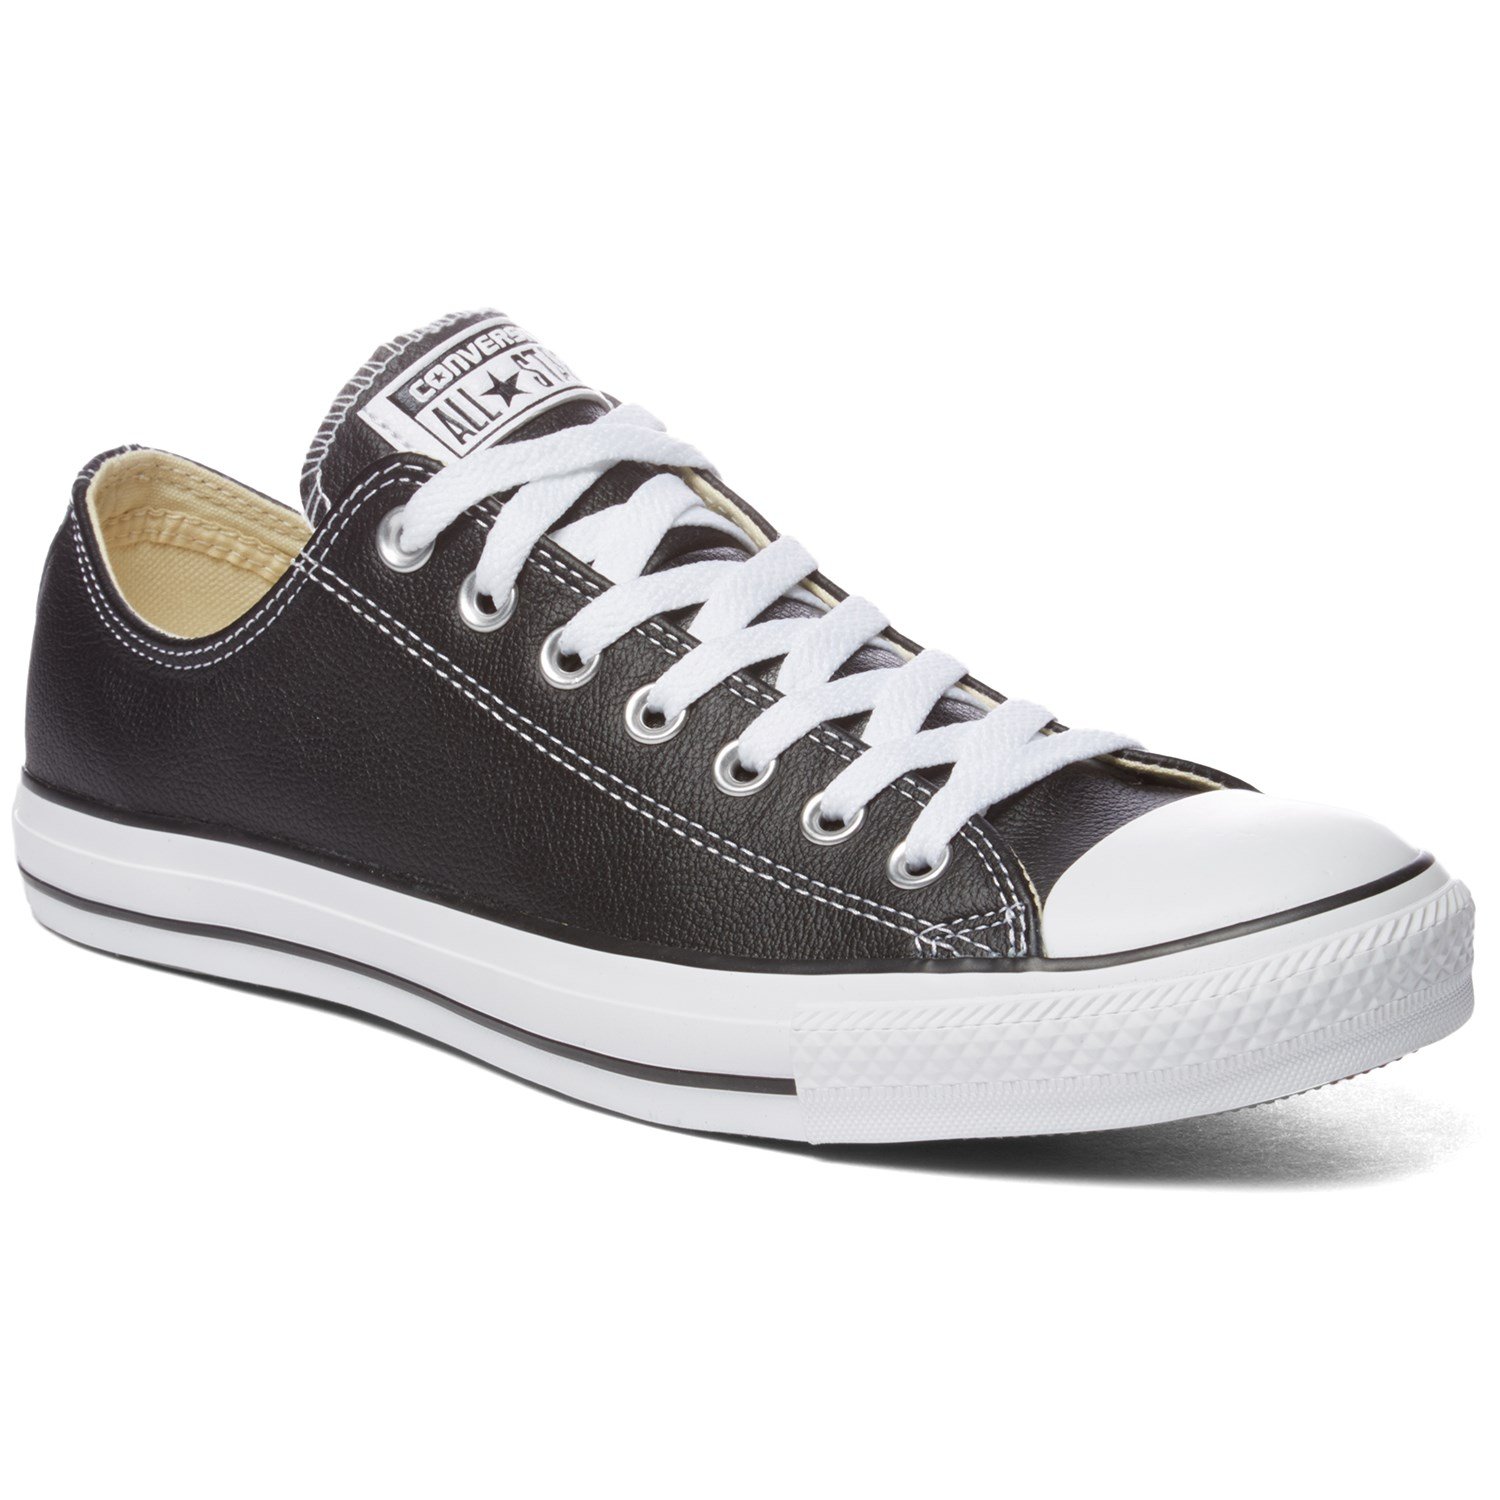 converse chuck taylor all star leather ox plimsolls